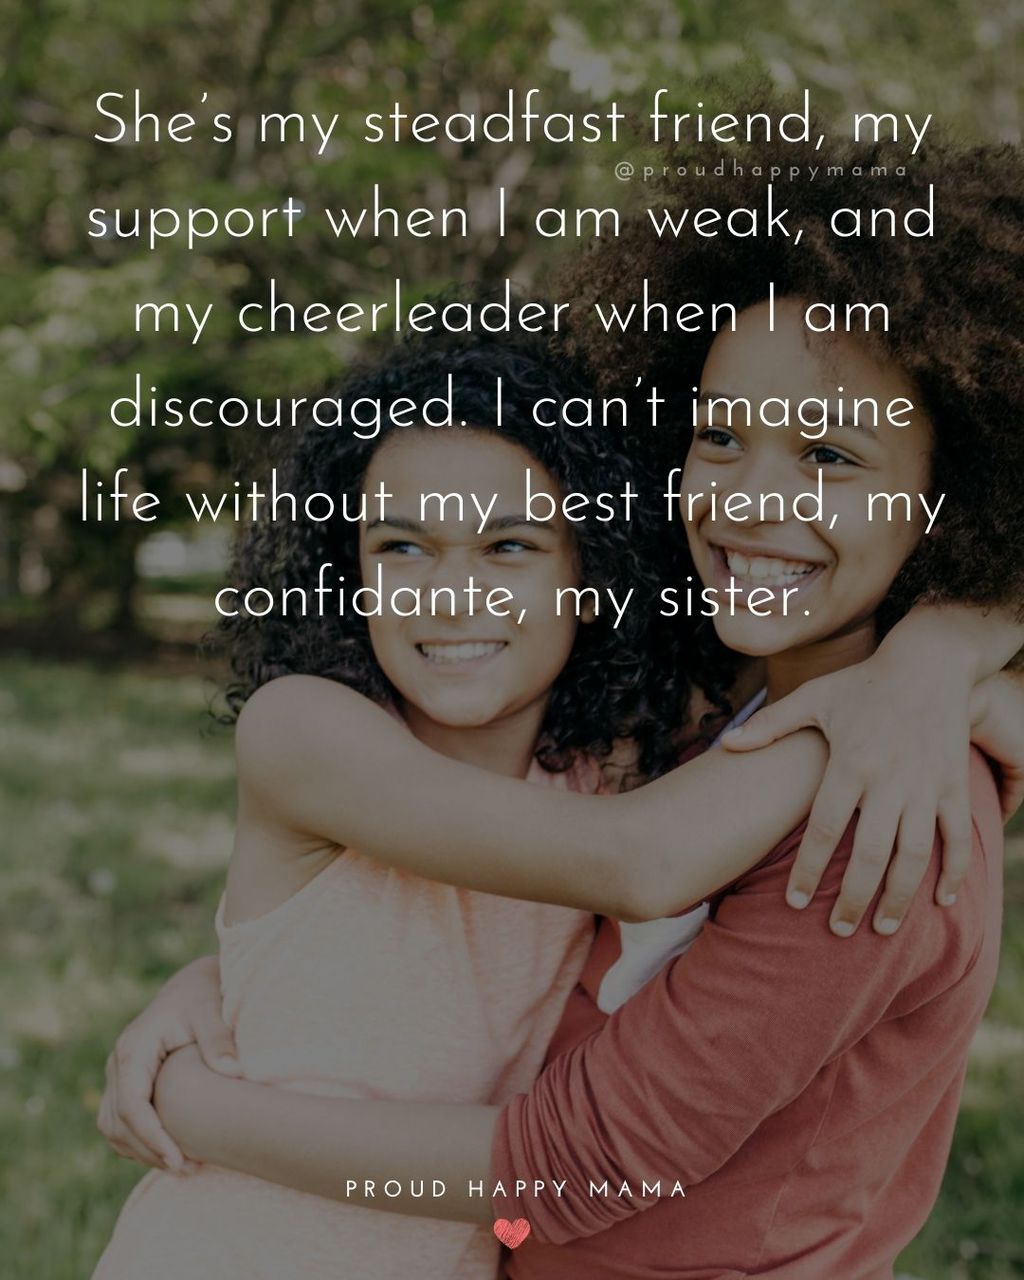 Sister Quotes - Shes my steadfast friend, my support when I am weak, and my cheerleader when I am discouraged. I cant imagine life without my best friend, my confidante, my sister.